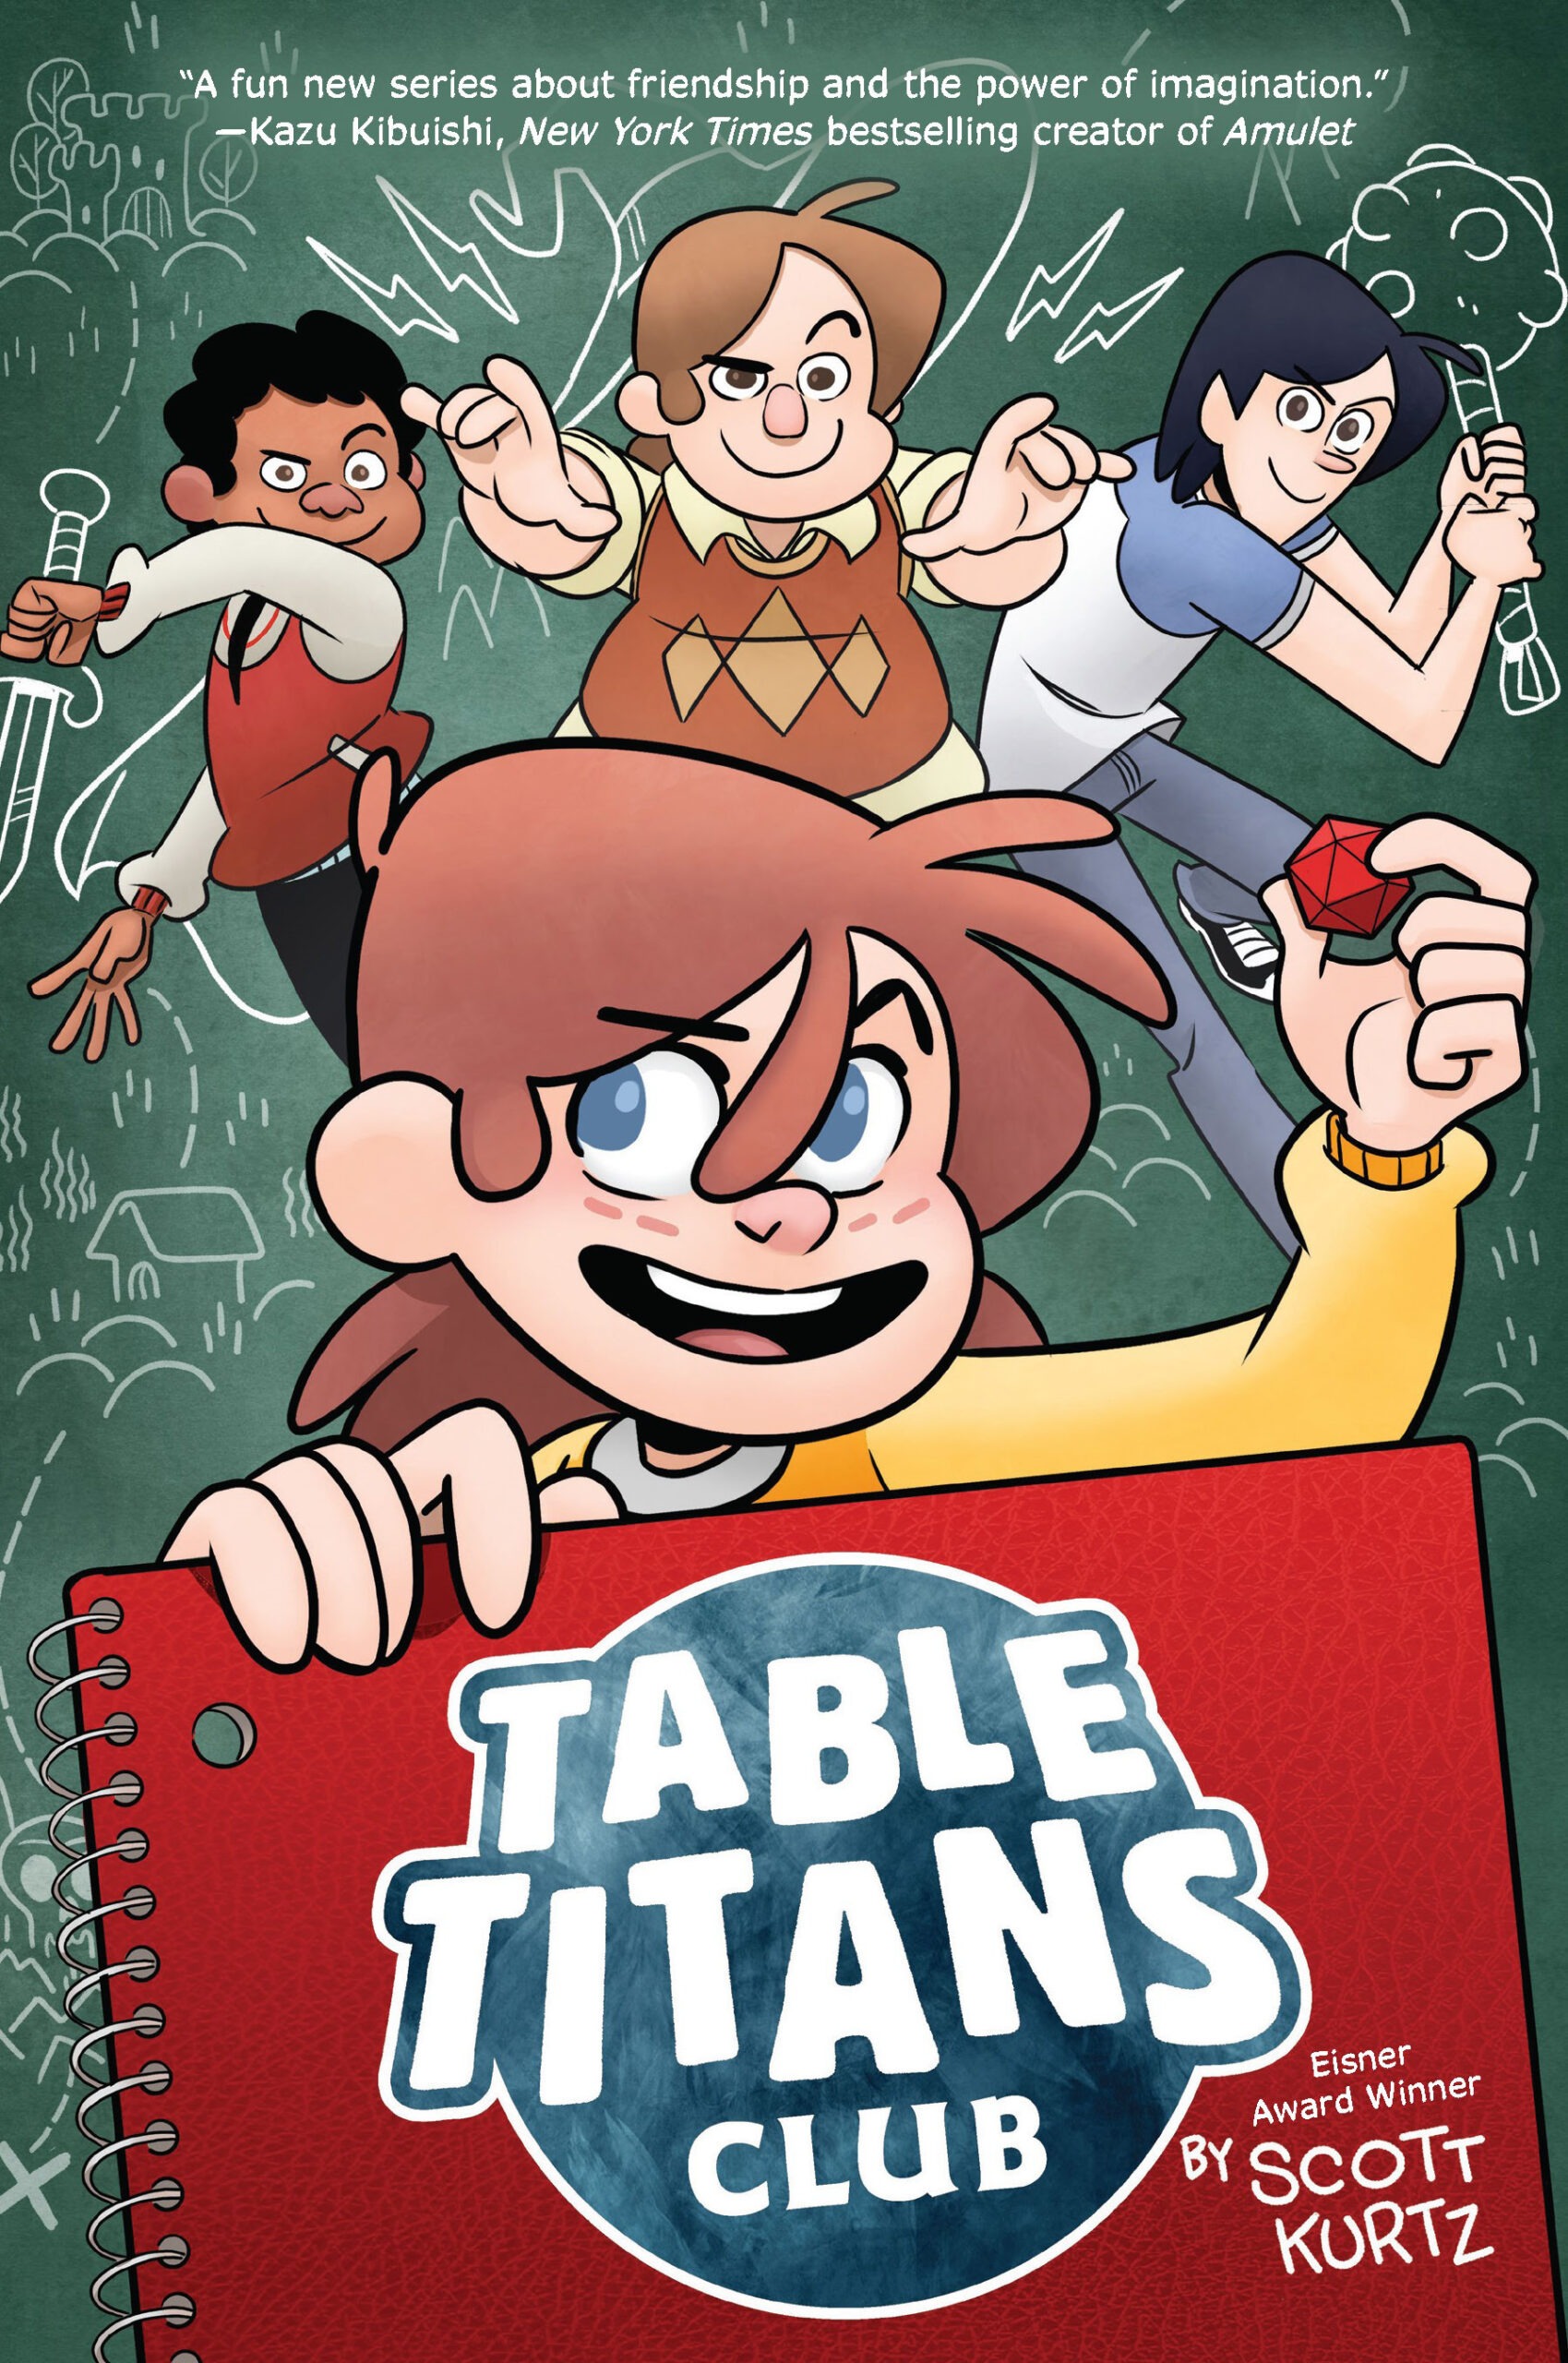 Why Every Middle Grade School Should Have Their Own Table Titans Club, a guest post by Scott Kurtz